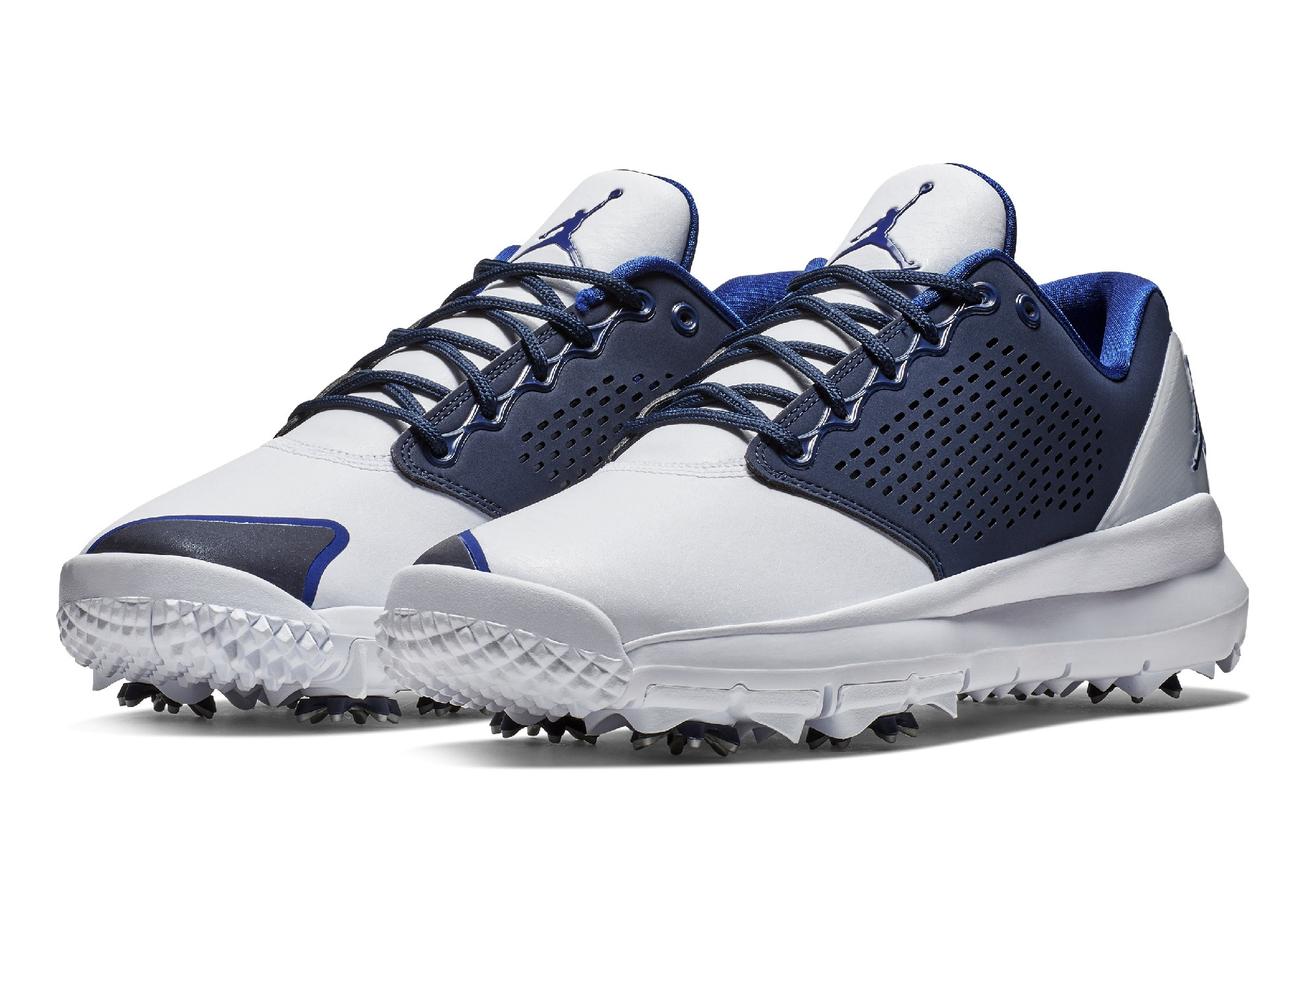 Astrolabio excepto por Oso polar The 7 coolest Nike Golf shoes you can purchase in UK ahead of 2019... |  GolfMagic